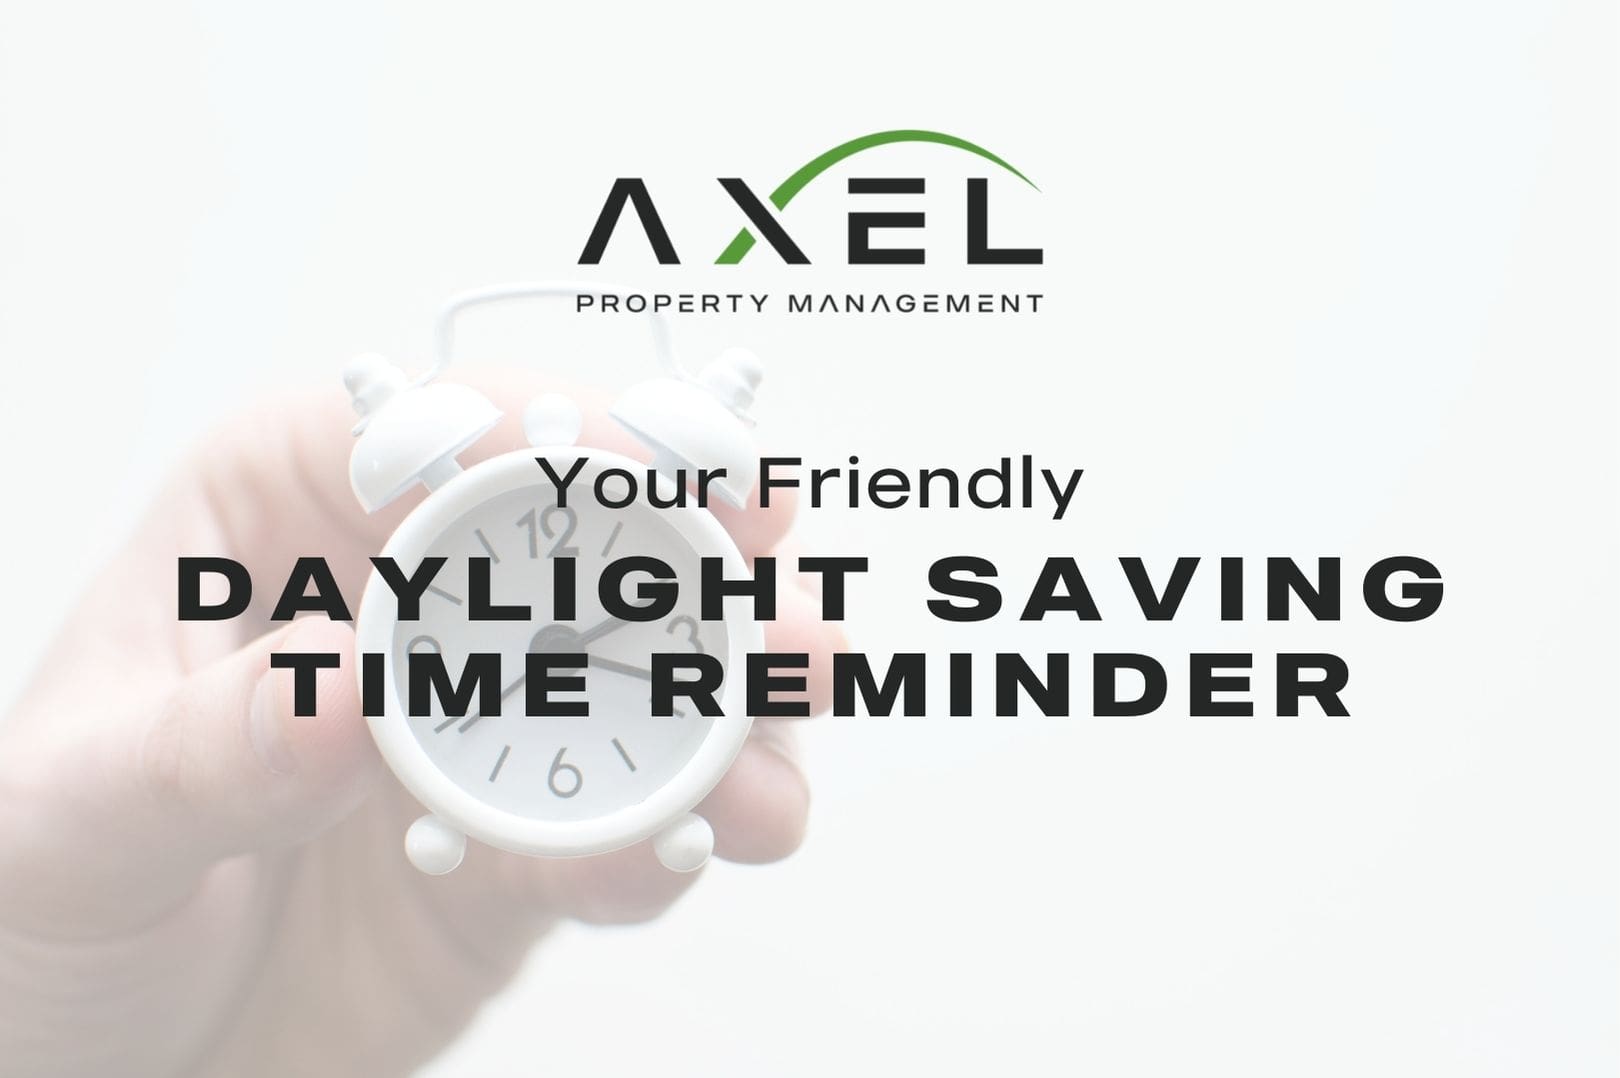 Your Friendly Daylight Saving Time Reminder (And other seasonal maintenance reminders rental property owners need to know)